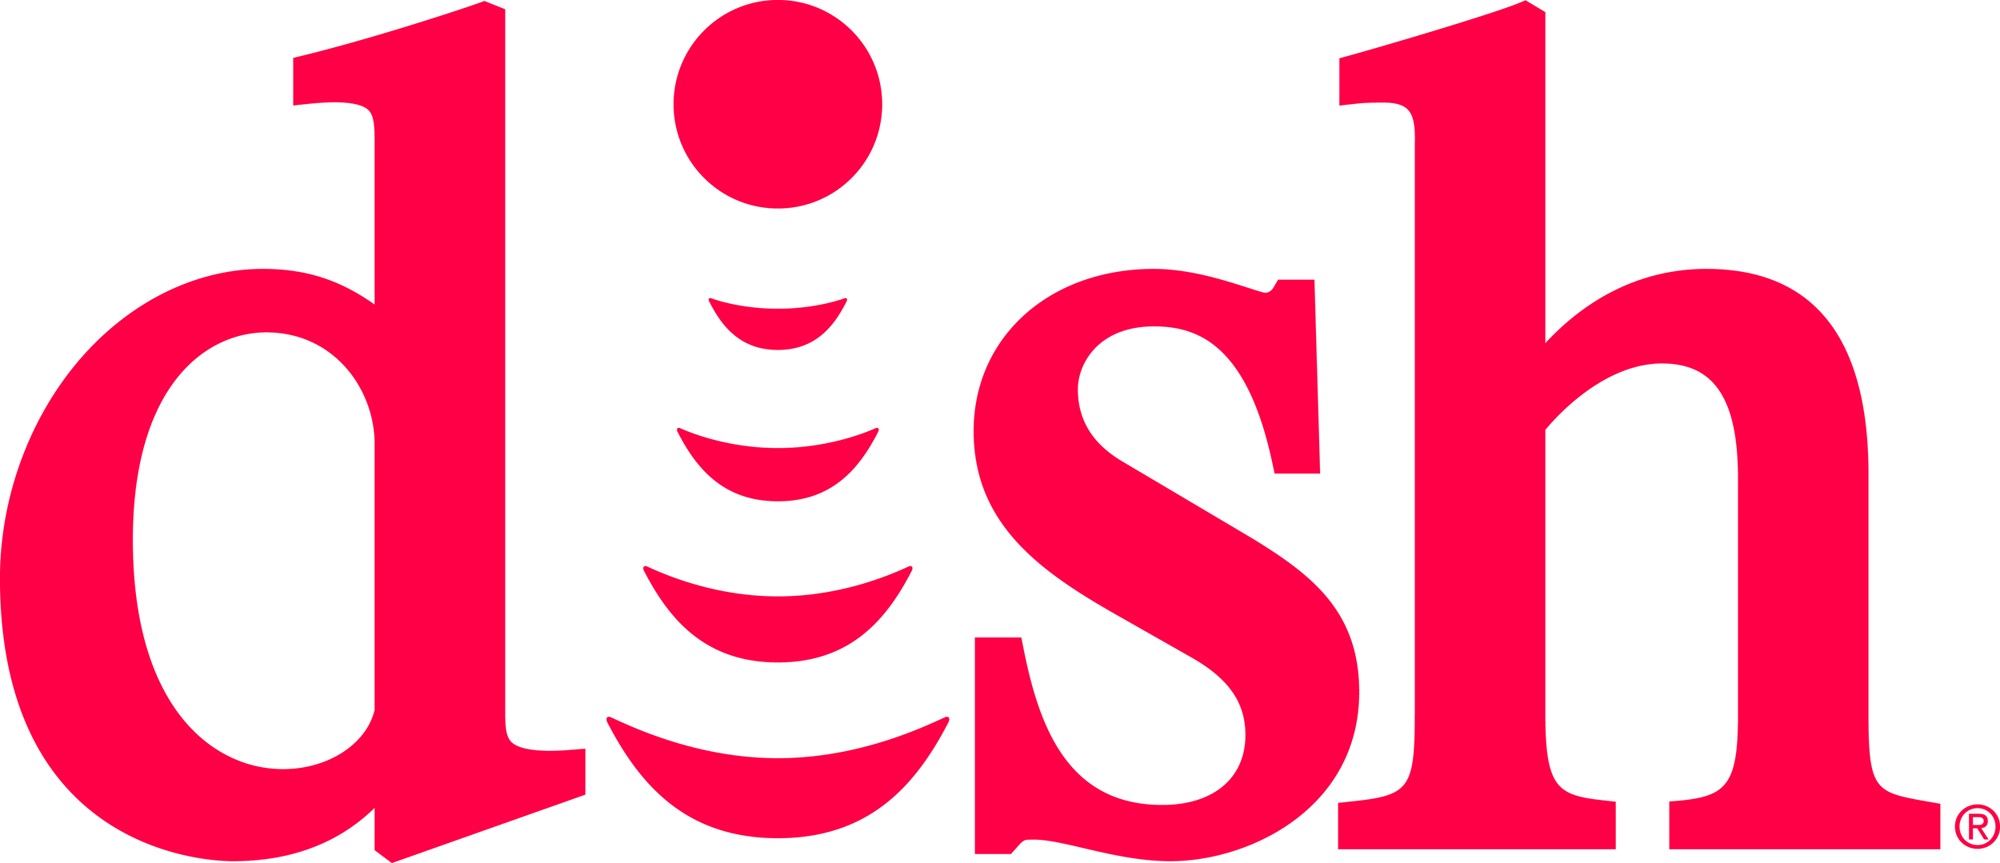 Prospective Merger of DIRECTV and DISH? A Comparison of Values